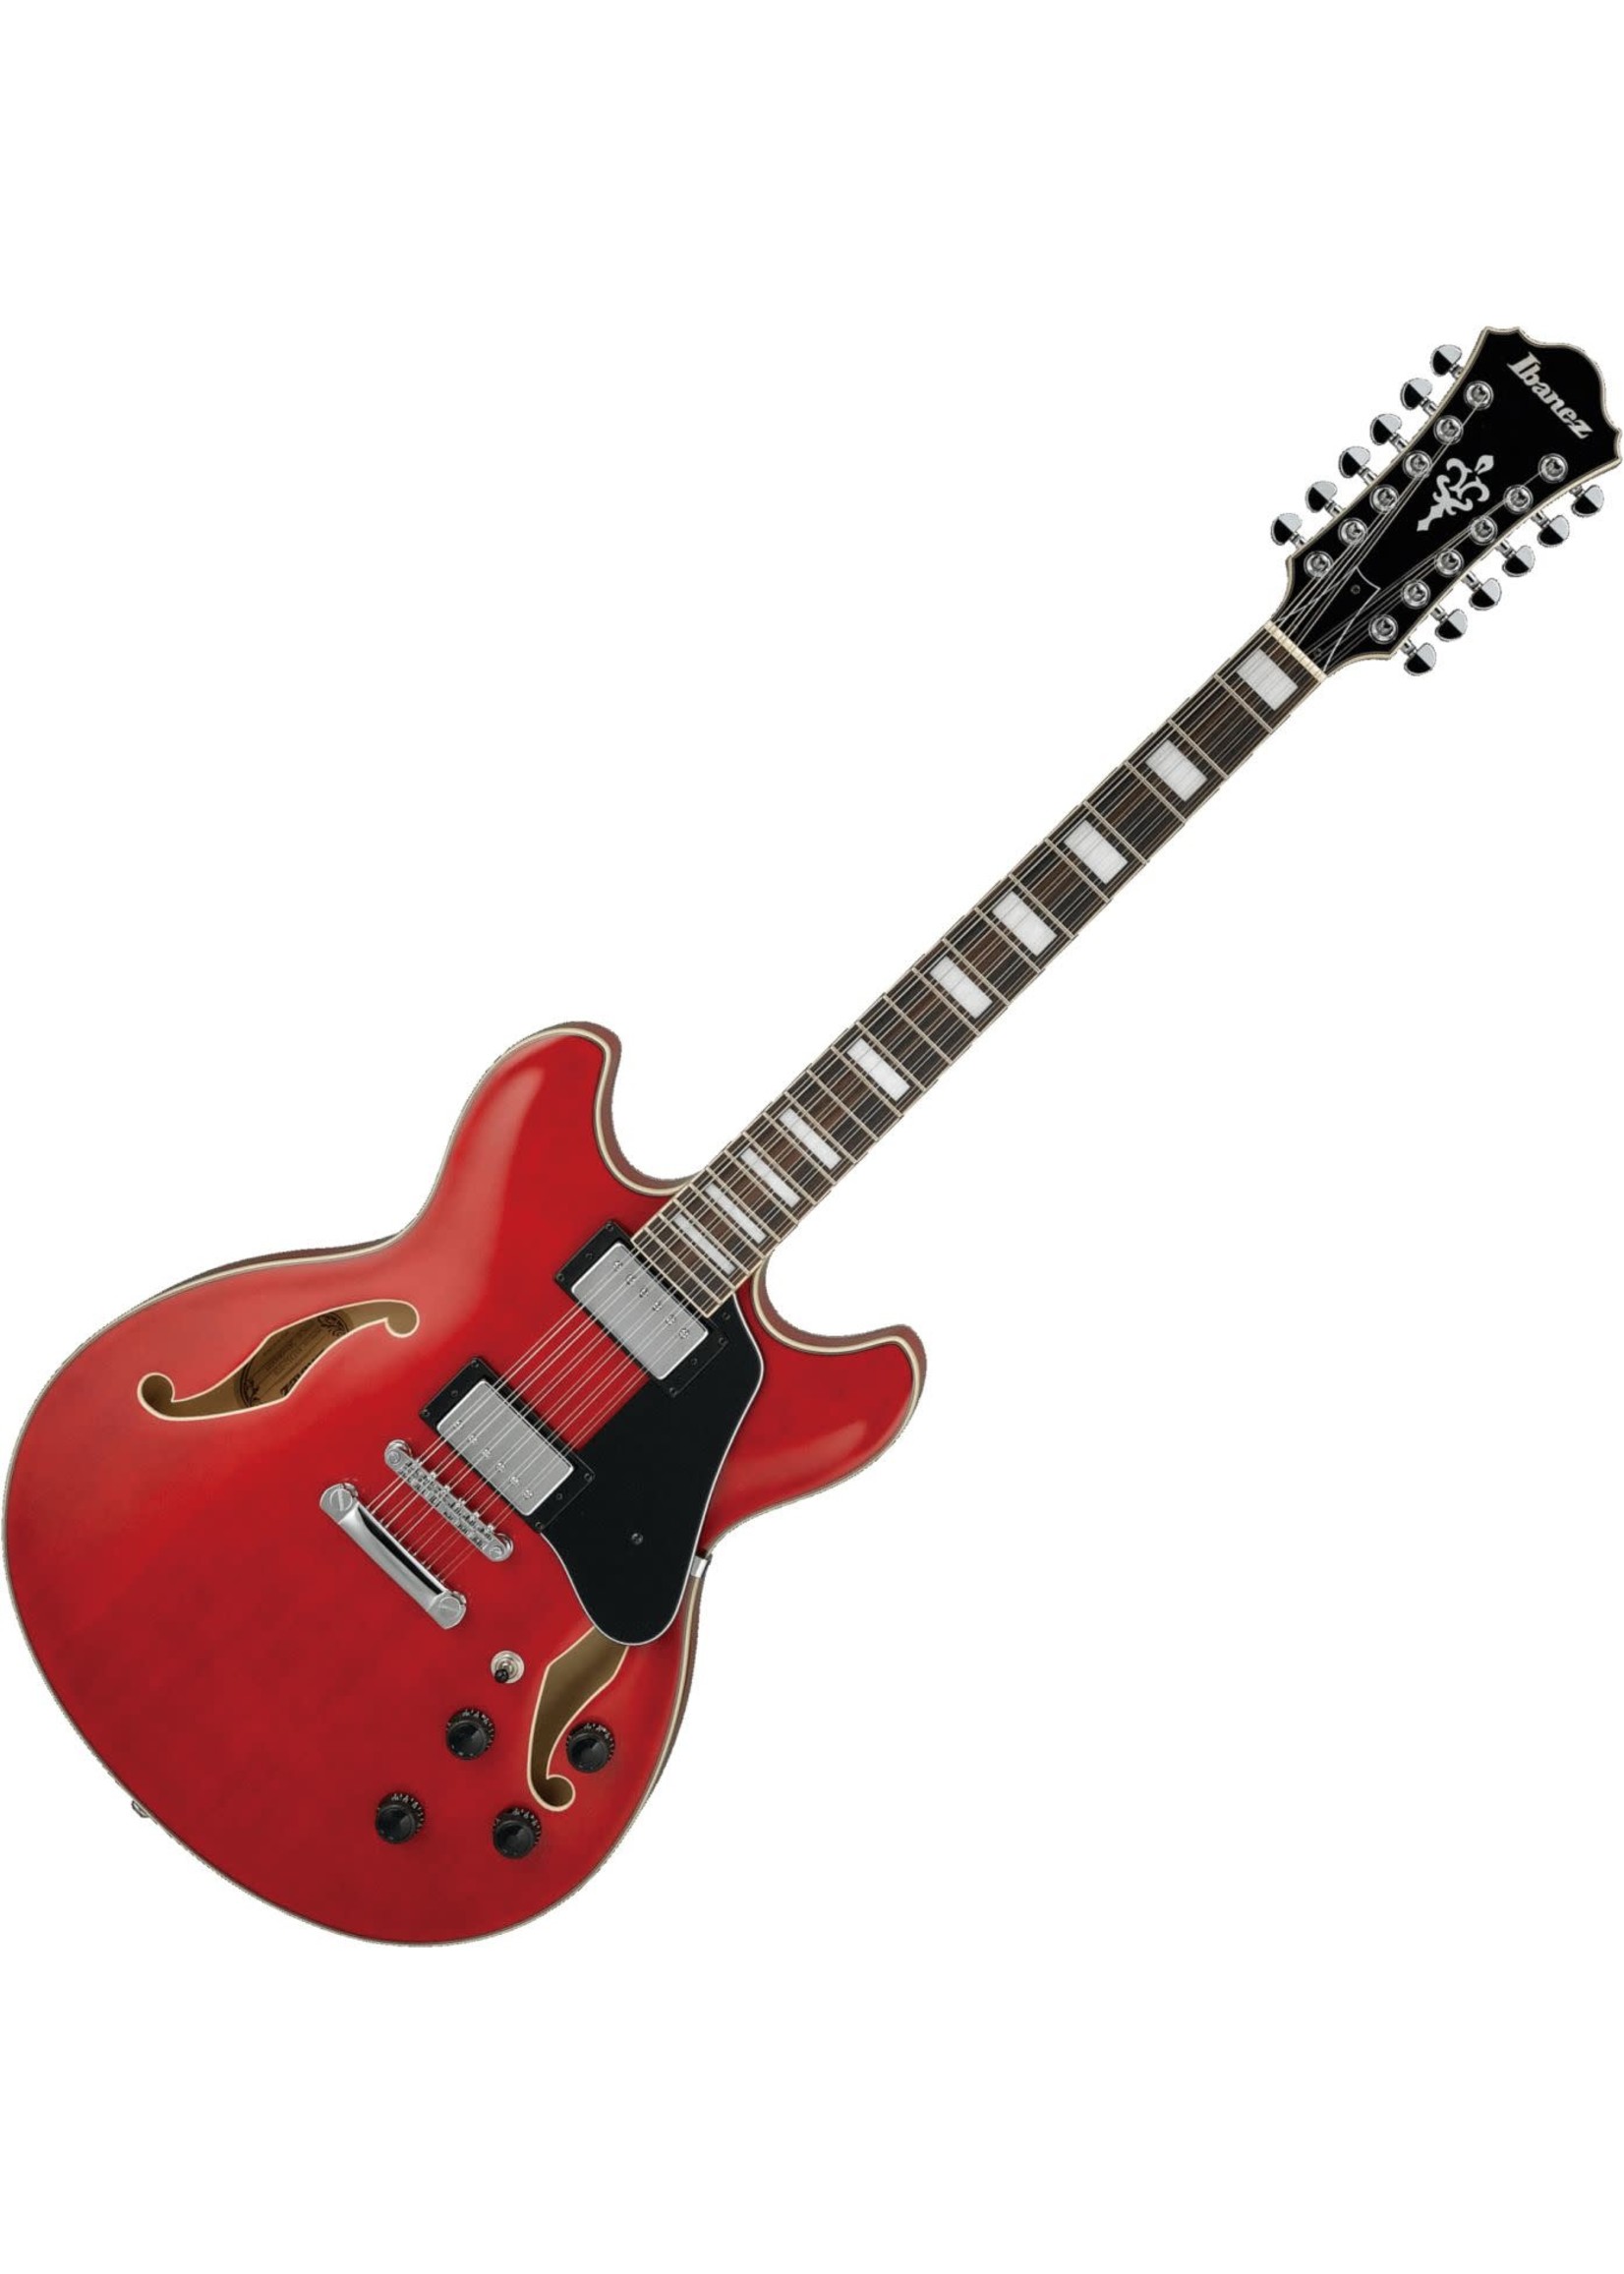 IBANEZ USED TRADE IN Ibanez AS7312TCD Artcore Series 12-String RH Semi-Hollow Electric Guitar-Transparent Cherry Red as-7312-tcd